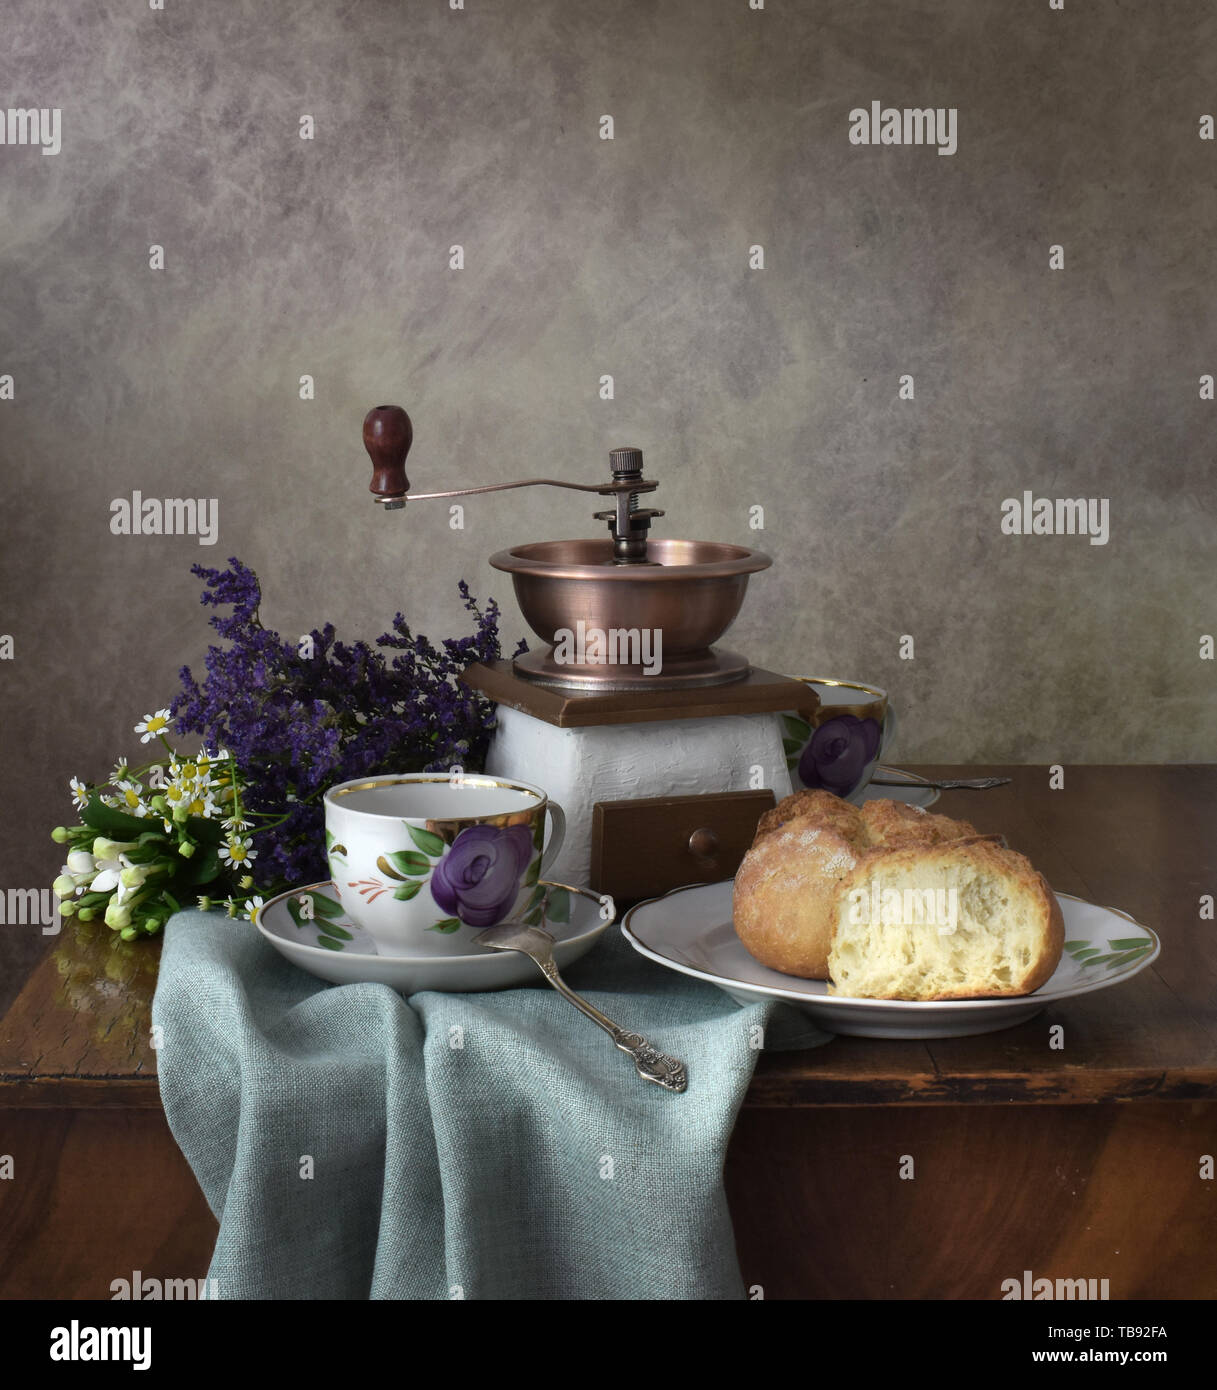 Retro still life poster breakfast. Vintage coffee grinder cups, silver spoon, homemade bread bakery. Dark light, wooden table, linen textile fabric Stock Photo